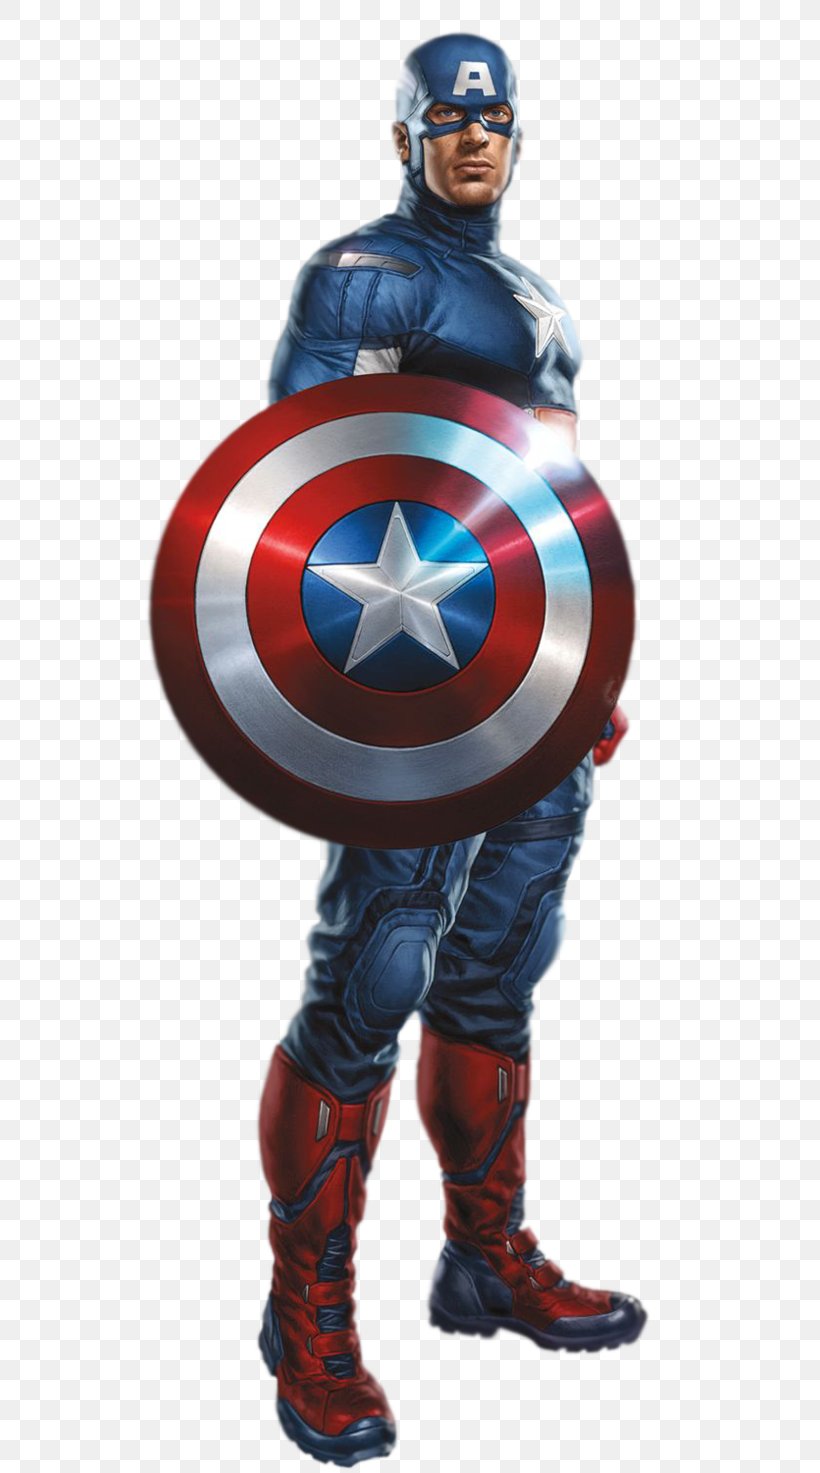 Captain America The Avengers Wall Decal Sticker Superhero, PNG, 543x1473px, Captain America, Action Figure, Avengers, Captain America Civil War, Captain America The First Avenger Download Free